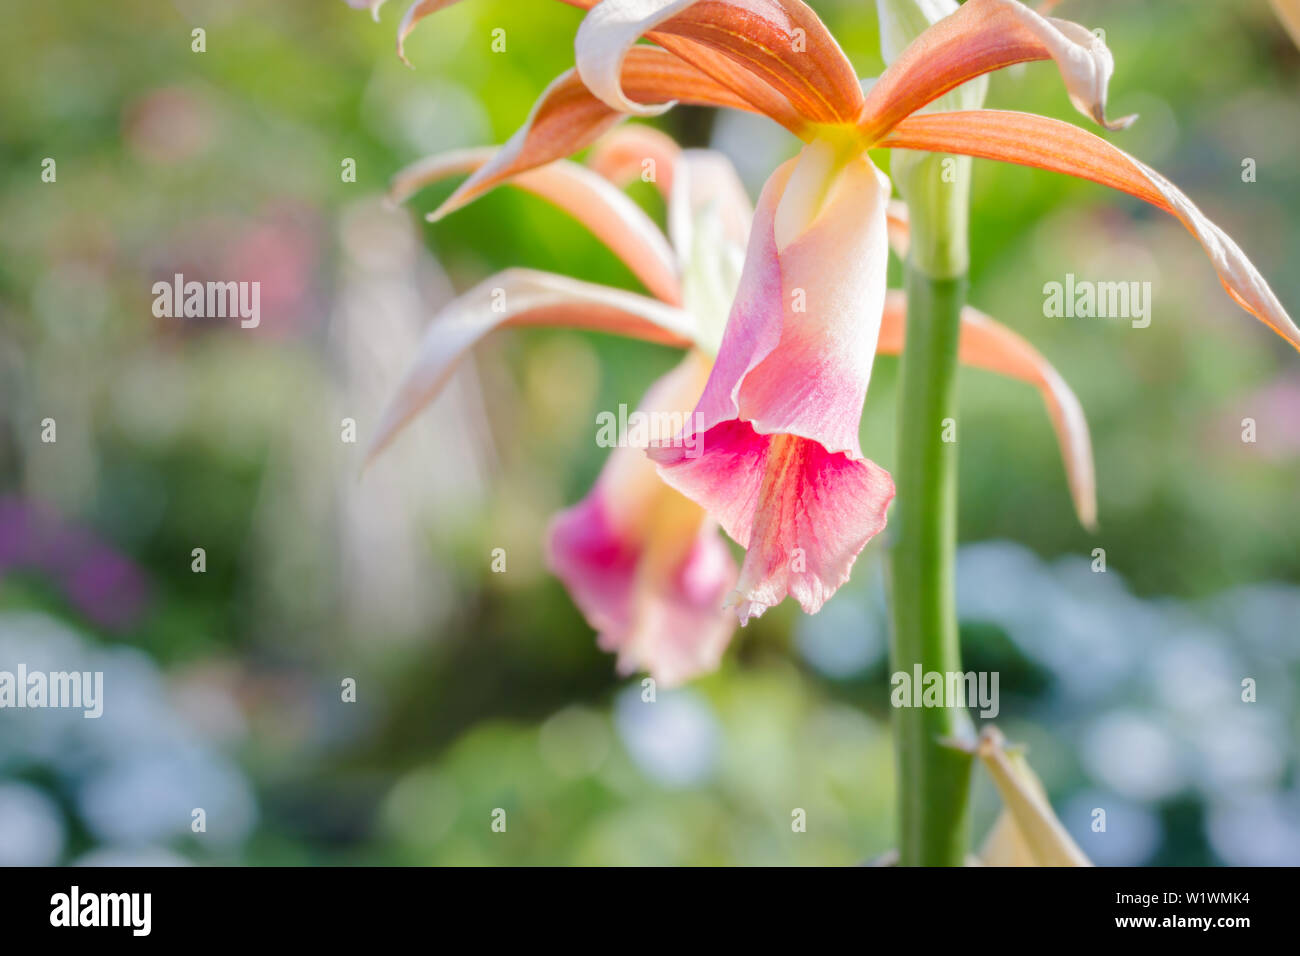 Beautiful purple and white orchid blooming close up view (Phaius tankervilleae) nature background. Stock Photo